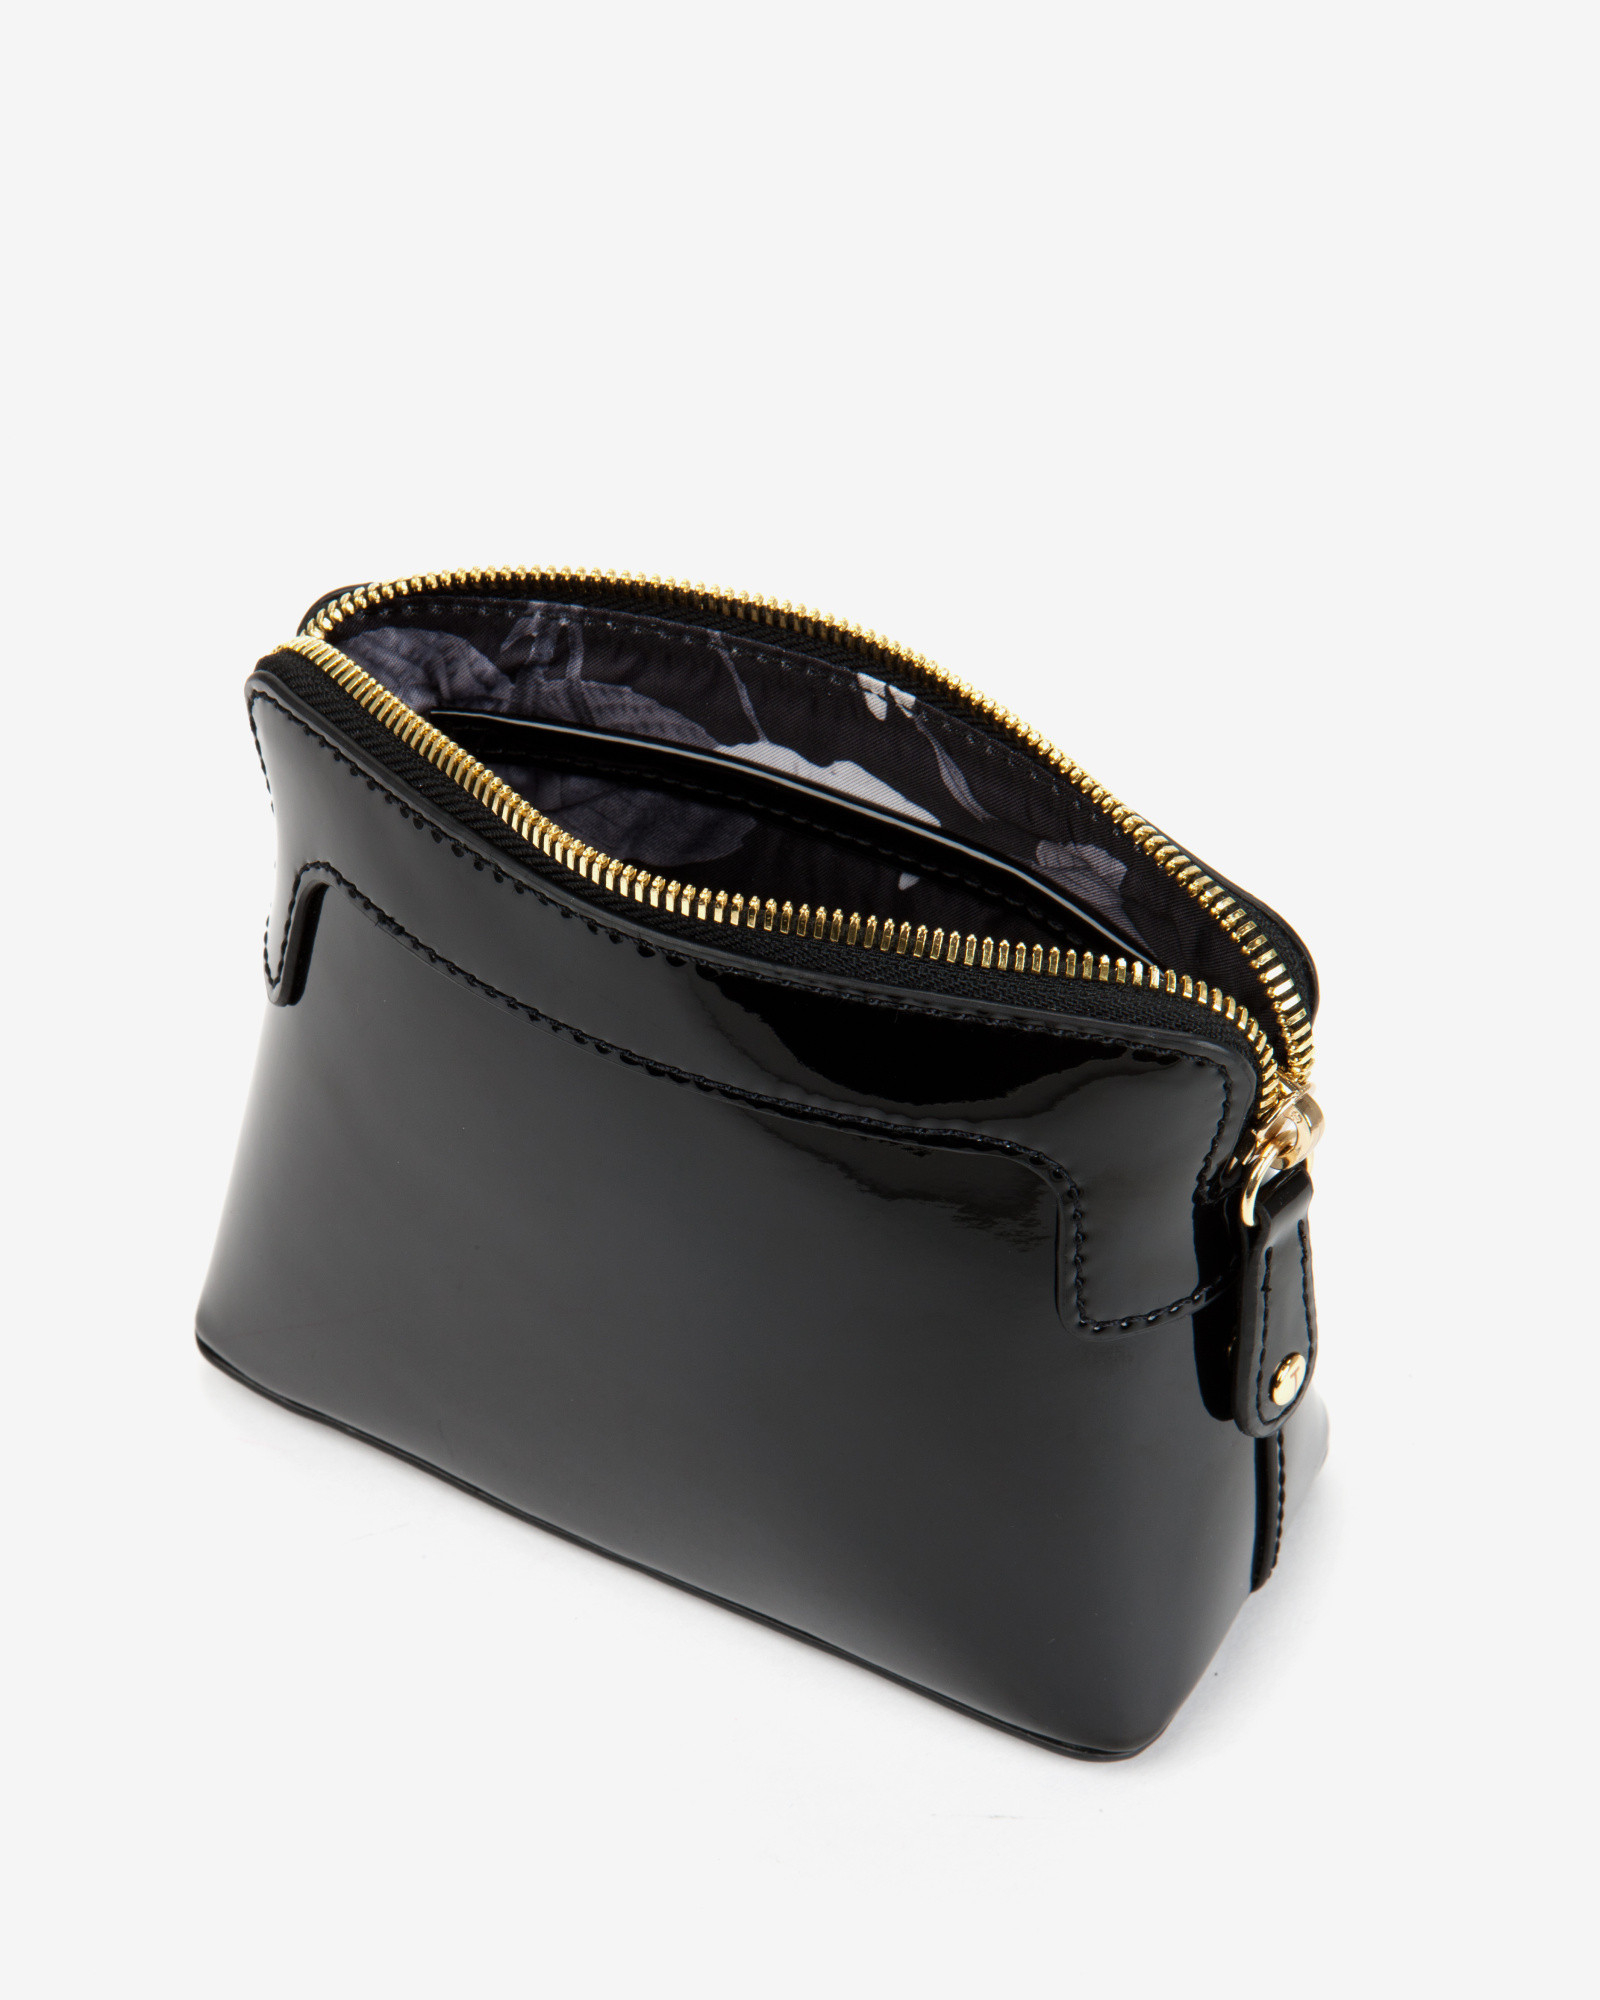 Ted baker Patent Cosmetic Bag in Black | Lyst